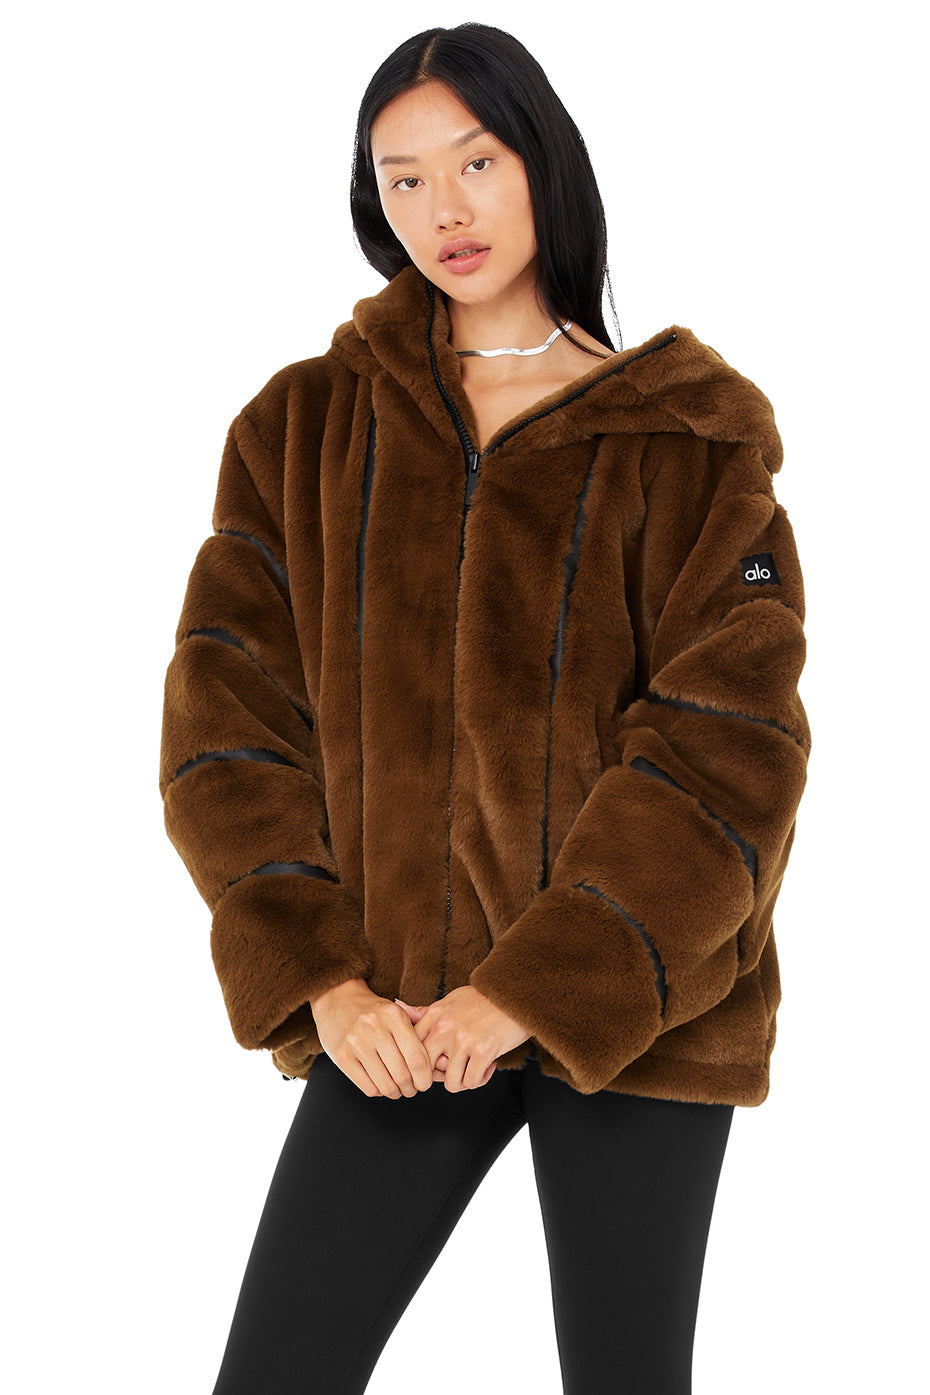 Knock Out Faux Fur Jacket in Chocolate by Alo Yoga - International Design  Forum